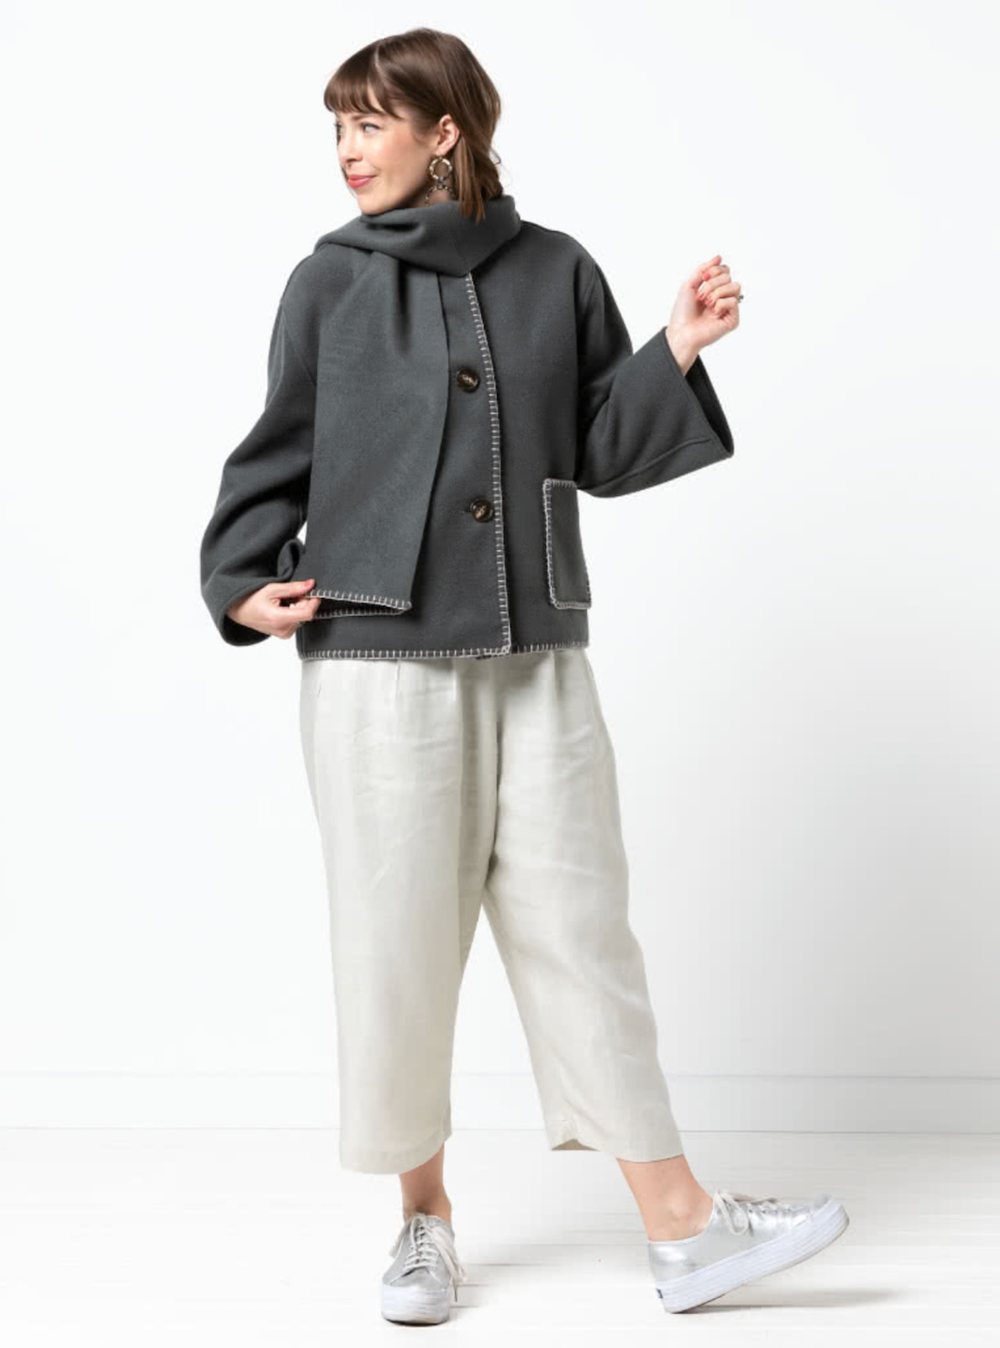 Woman wearing the Wren Jacket sewing pattern from Style Arc on The Fold Line. An unlined jacket and scarf pattern made in melton, boiled wool, wool coating, or linen fabric, featuring a square shaped jacket with a round neck, dropped shoulder line, button